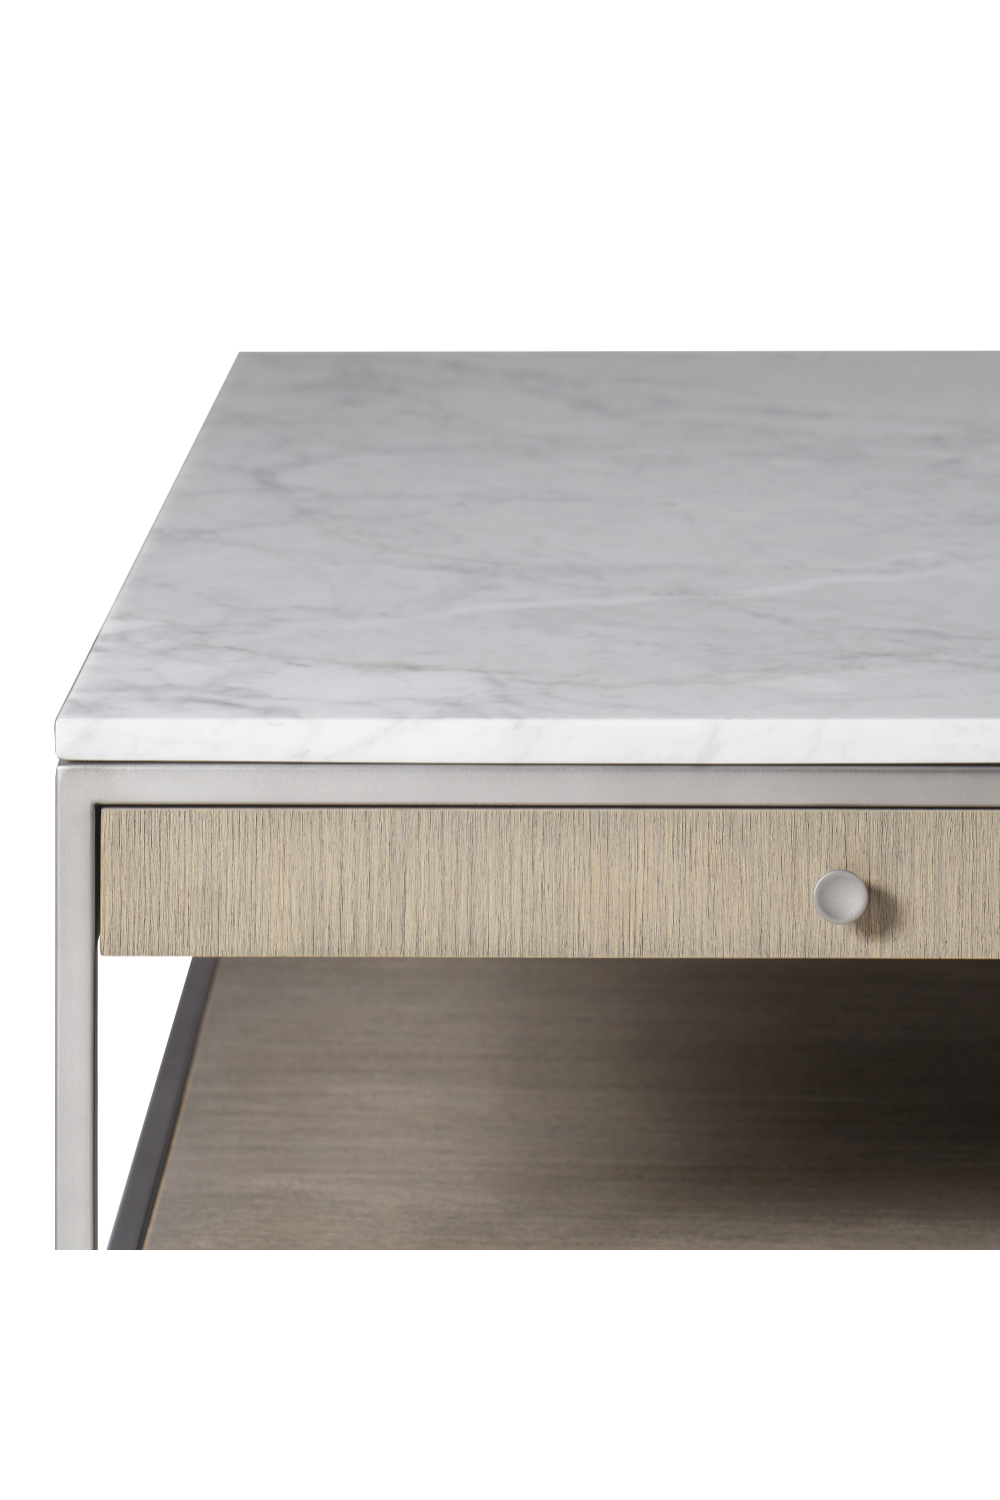 Gray Oak Marble Coffee Table L | Andrew Martin Paxton | Woodfurniture.com